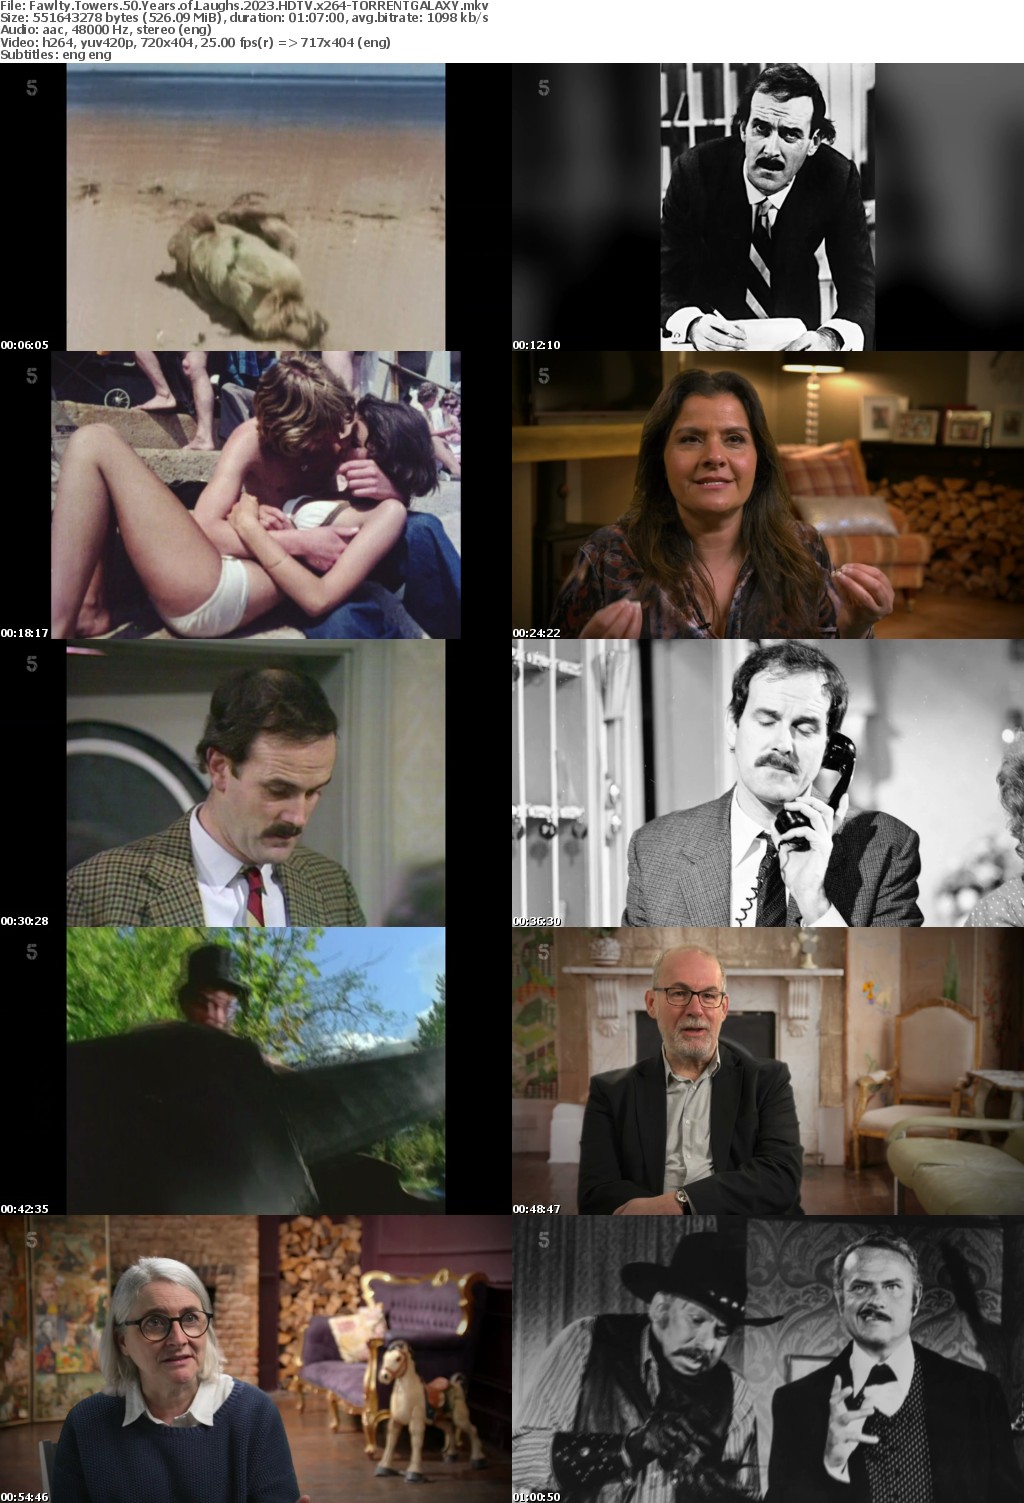 Fawlty Towers 50 Years of Laughs 2023 HDTV x264-GALAXY